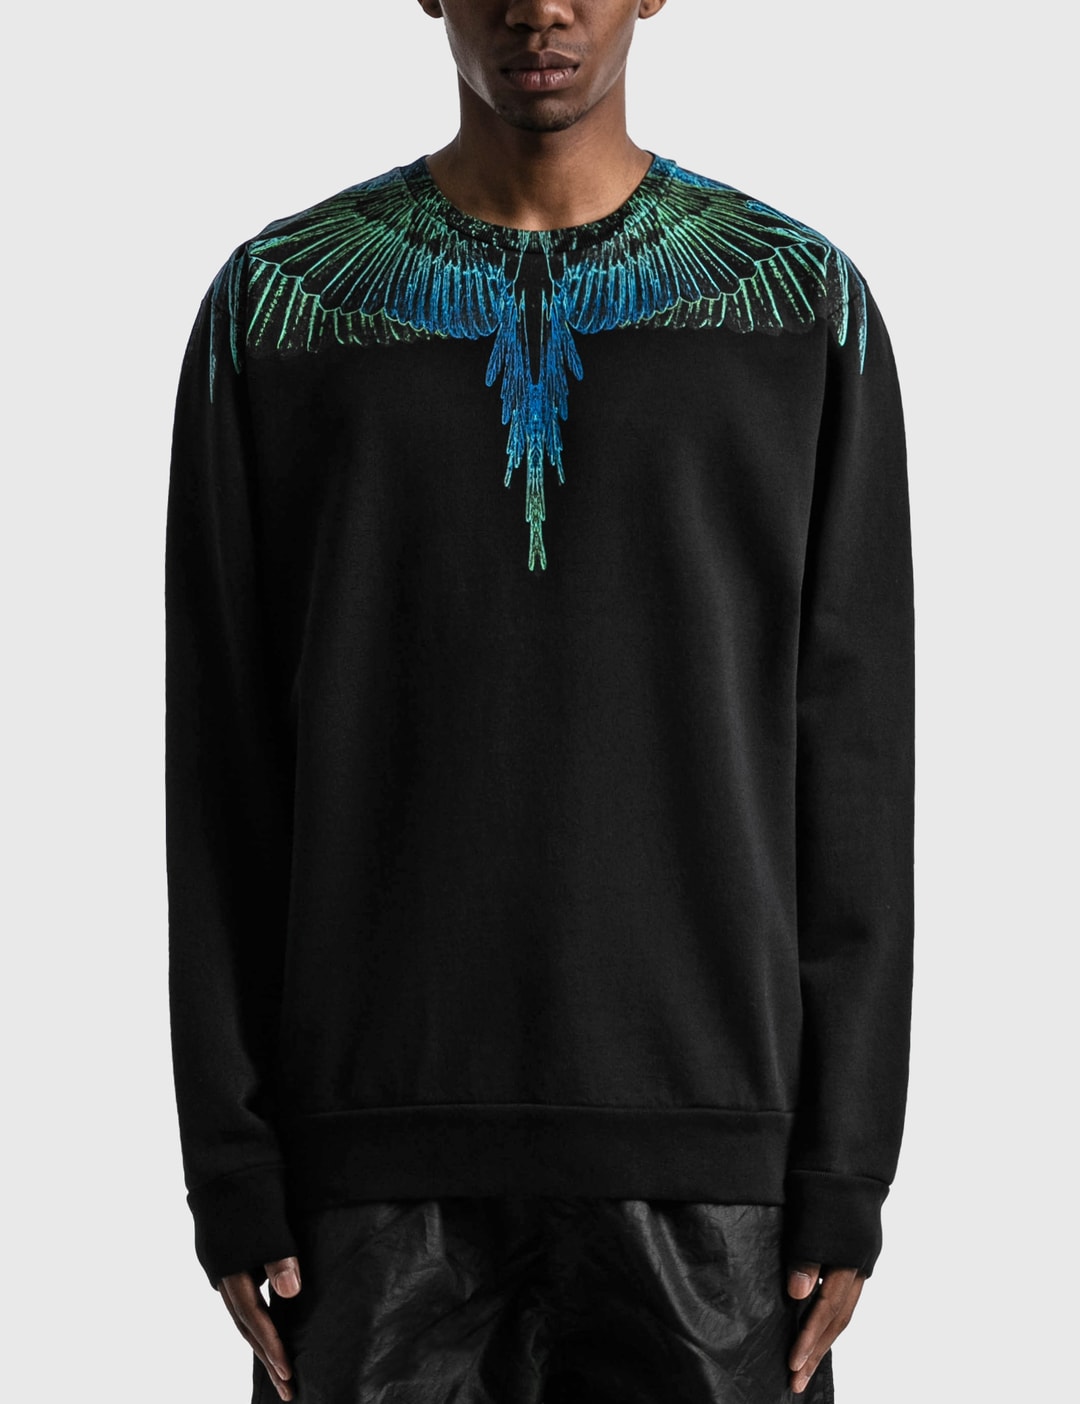 Marcelo Burlon - Blue Wings Sweatshirt | HBX - Globally Curated and Lifestyle by Hypebeast